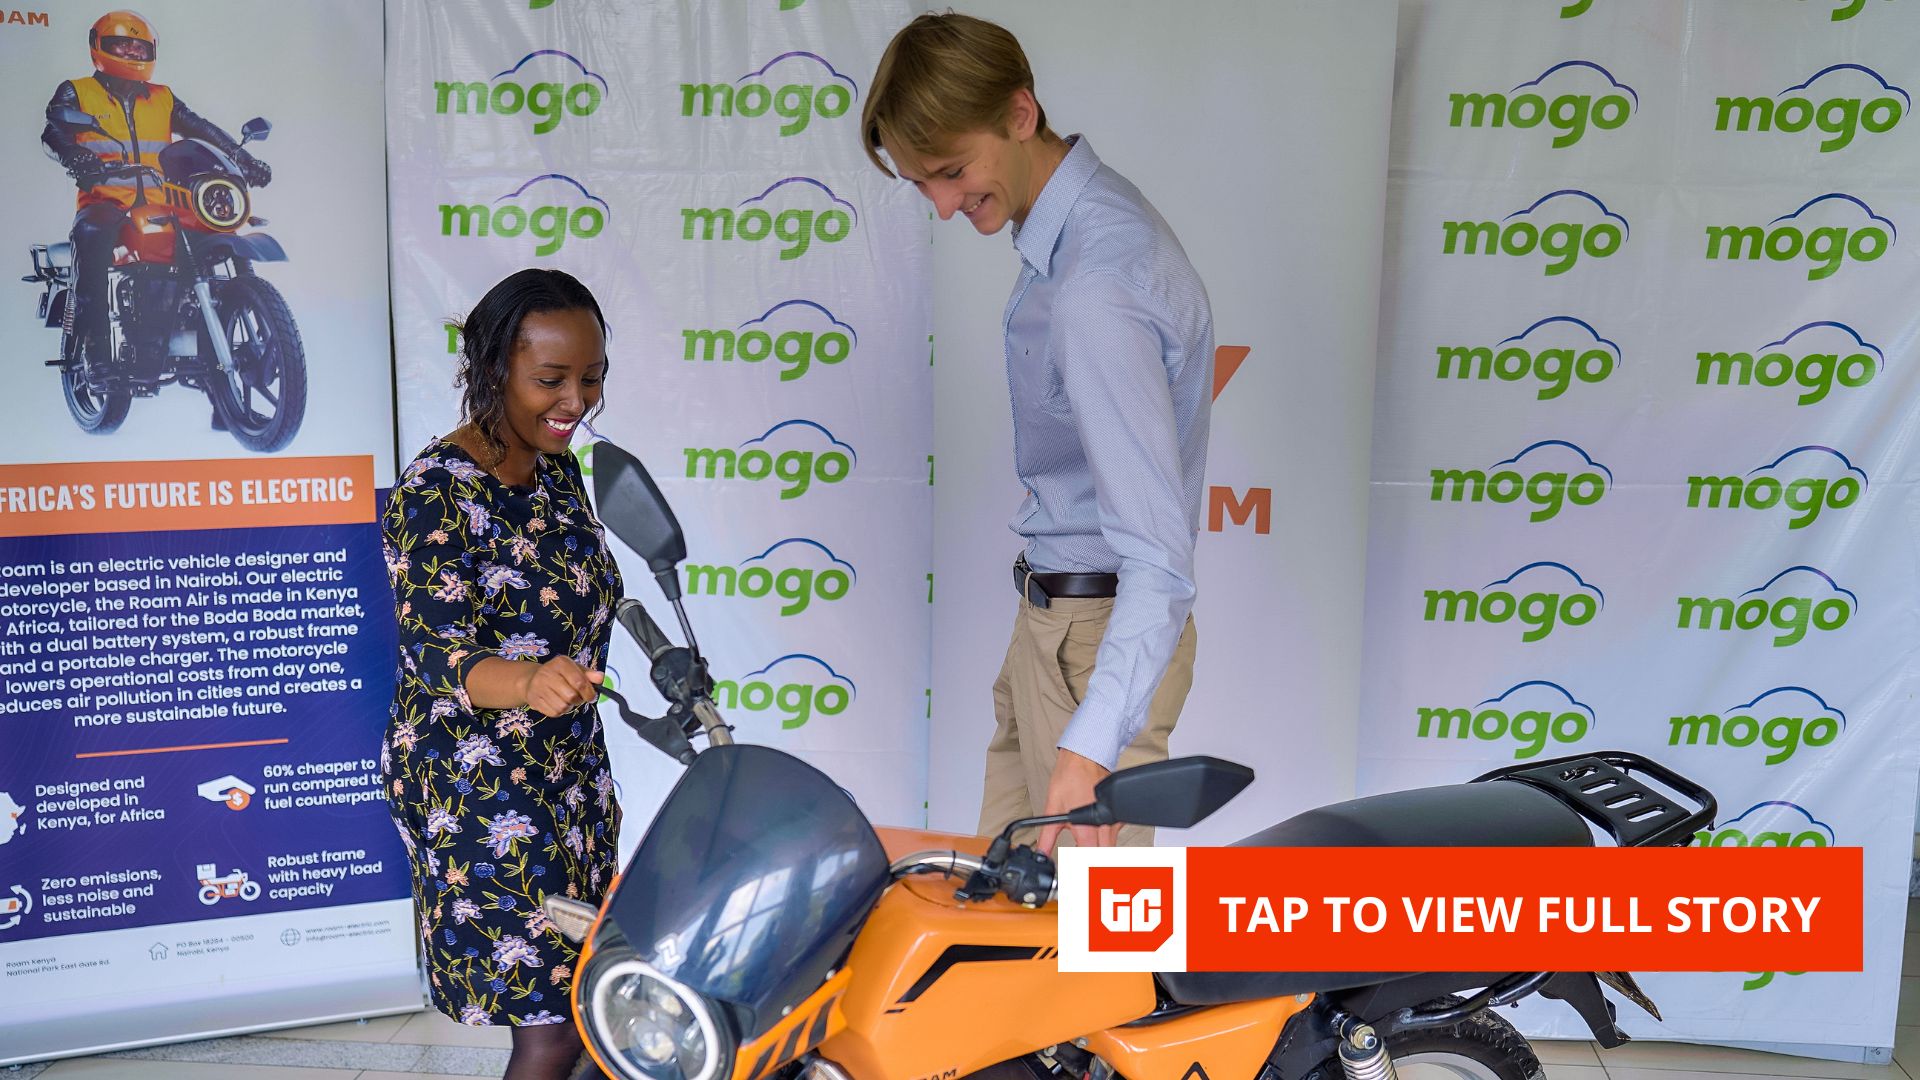 Roam secures financing deal with Mogo to grow electric motorcycle adoption